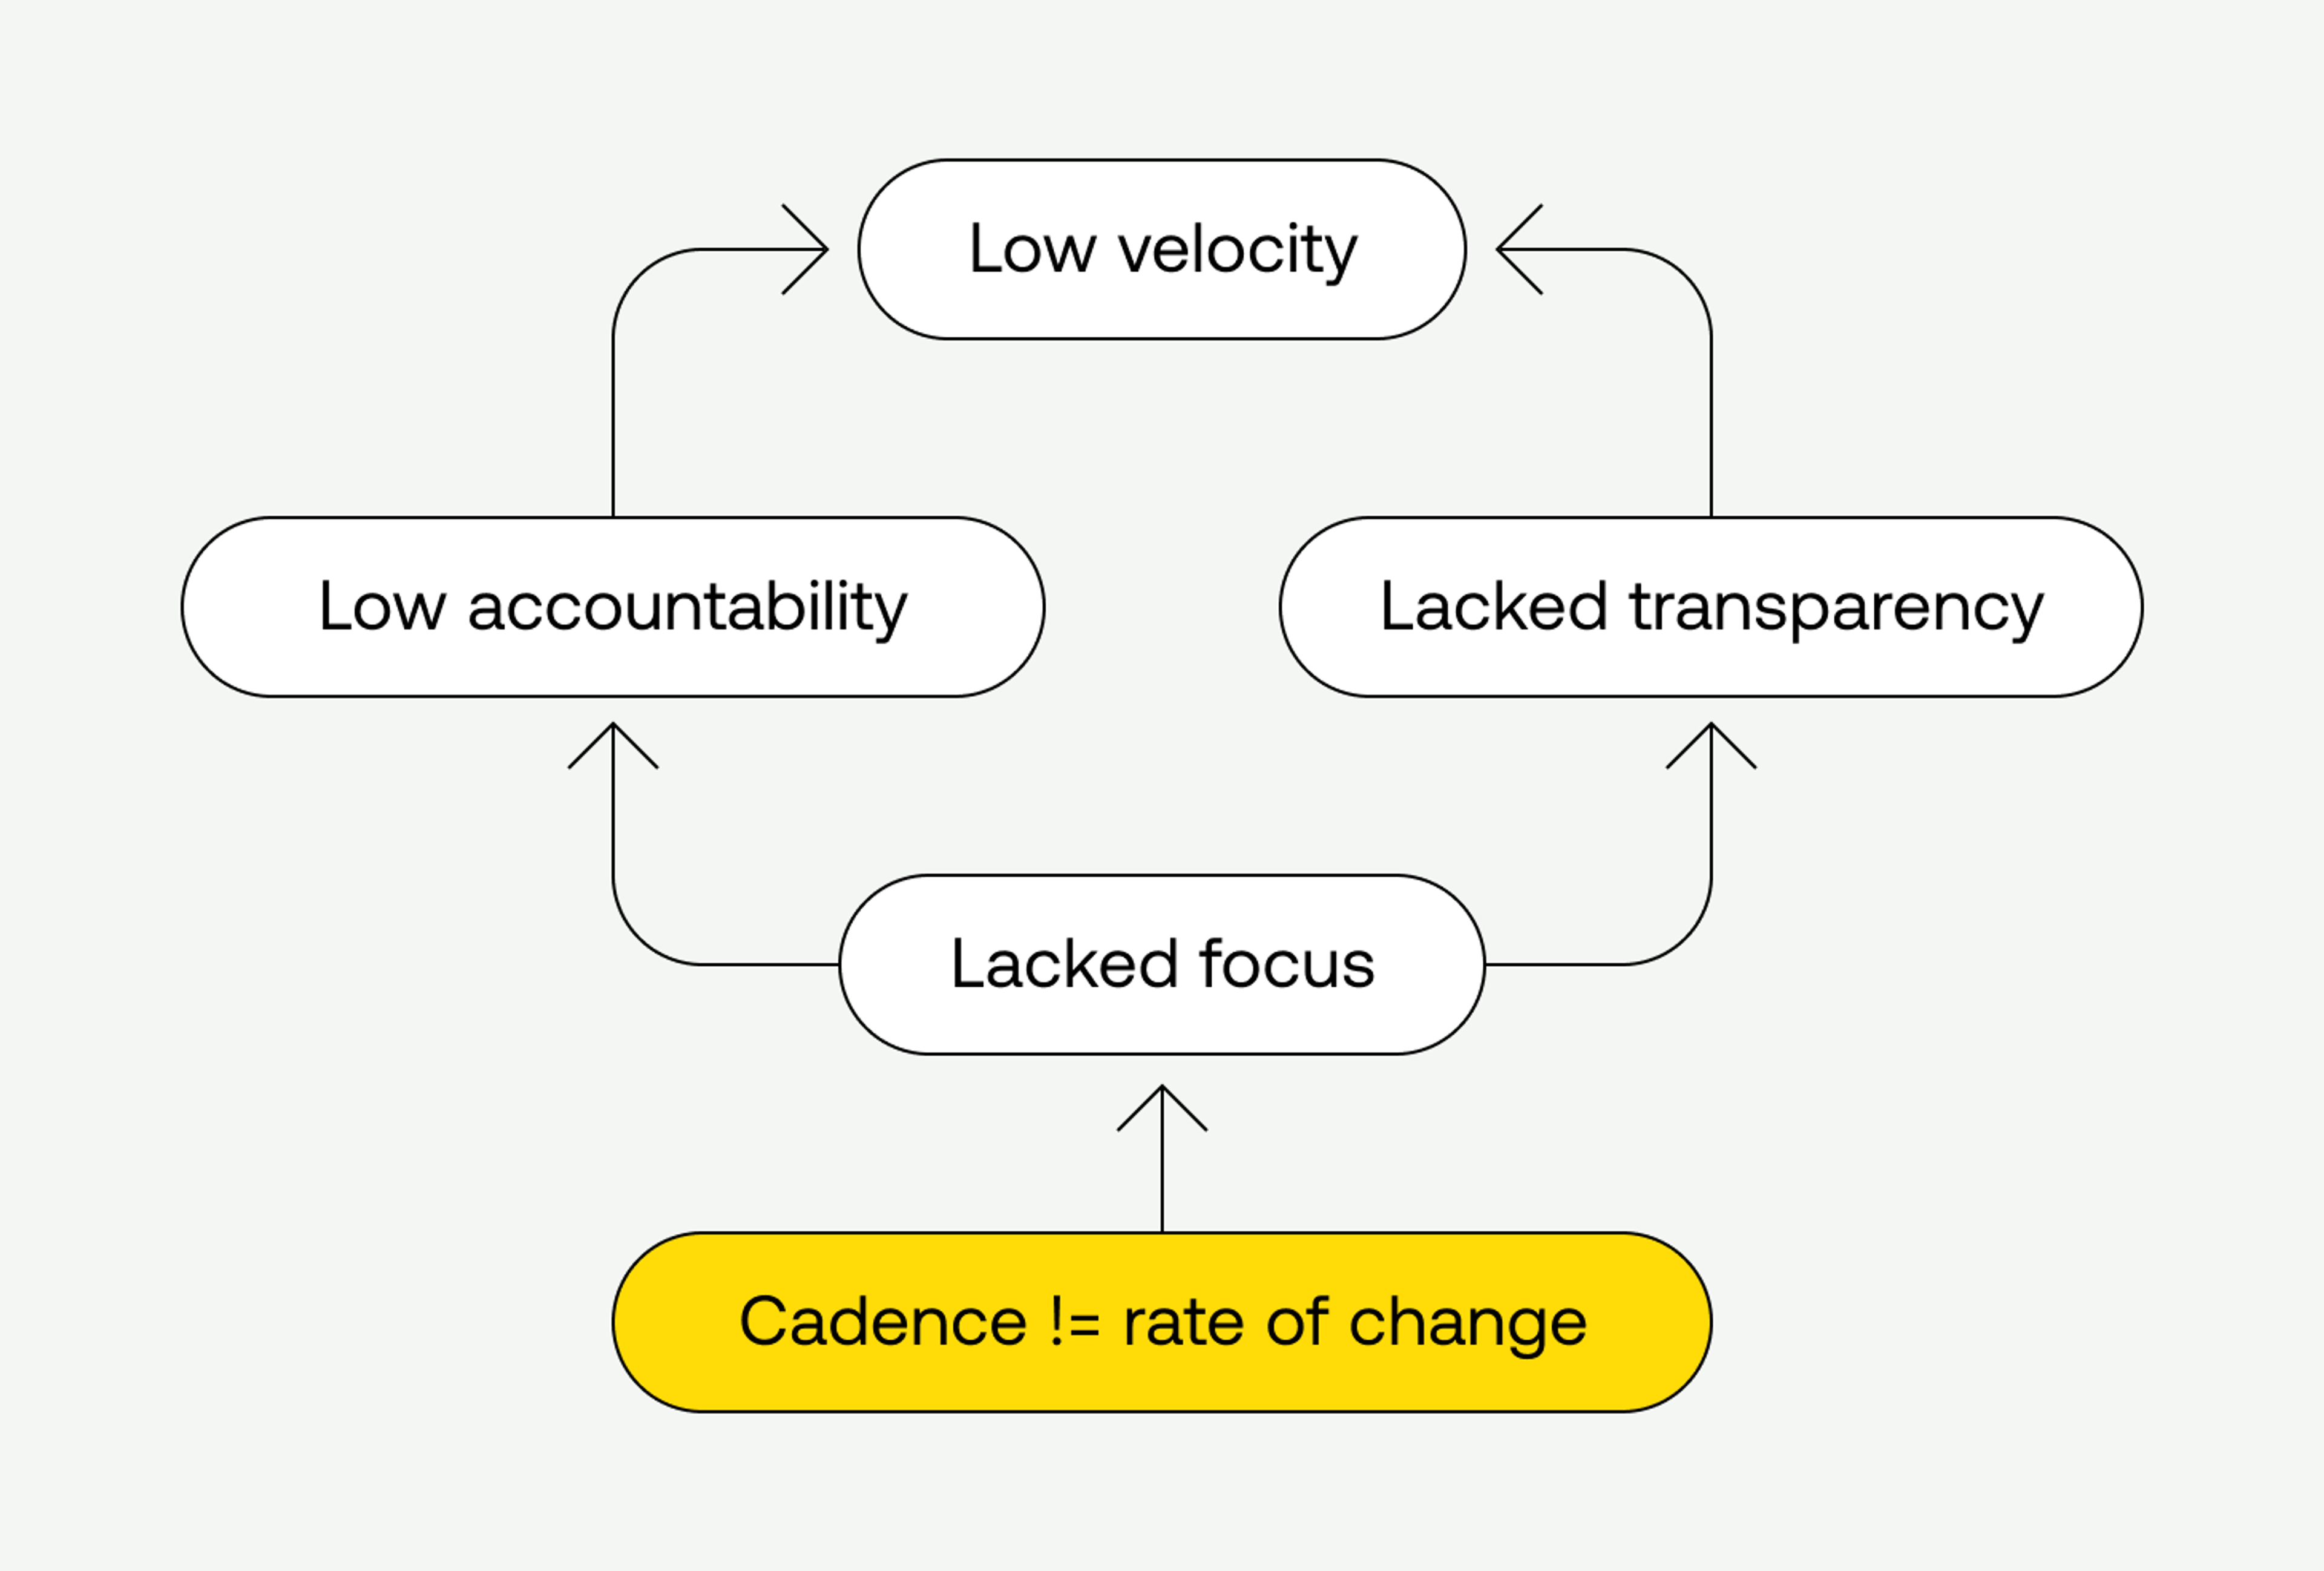 Same chart as above, but now below the chart it reads "cadence != rate of change" with an arrow connecting to "lacked focus".